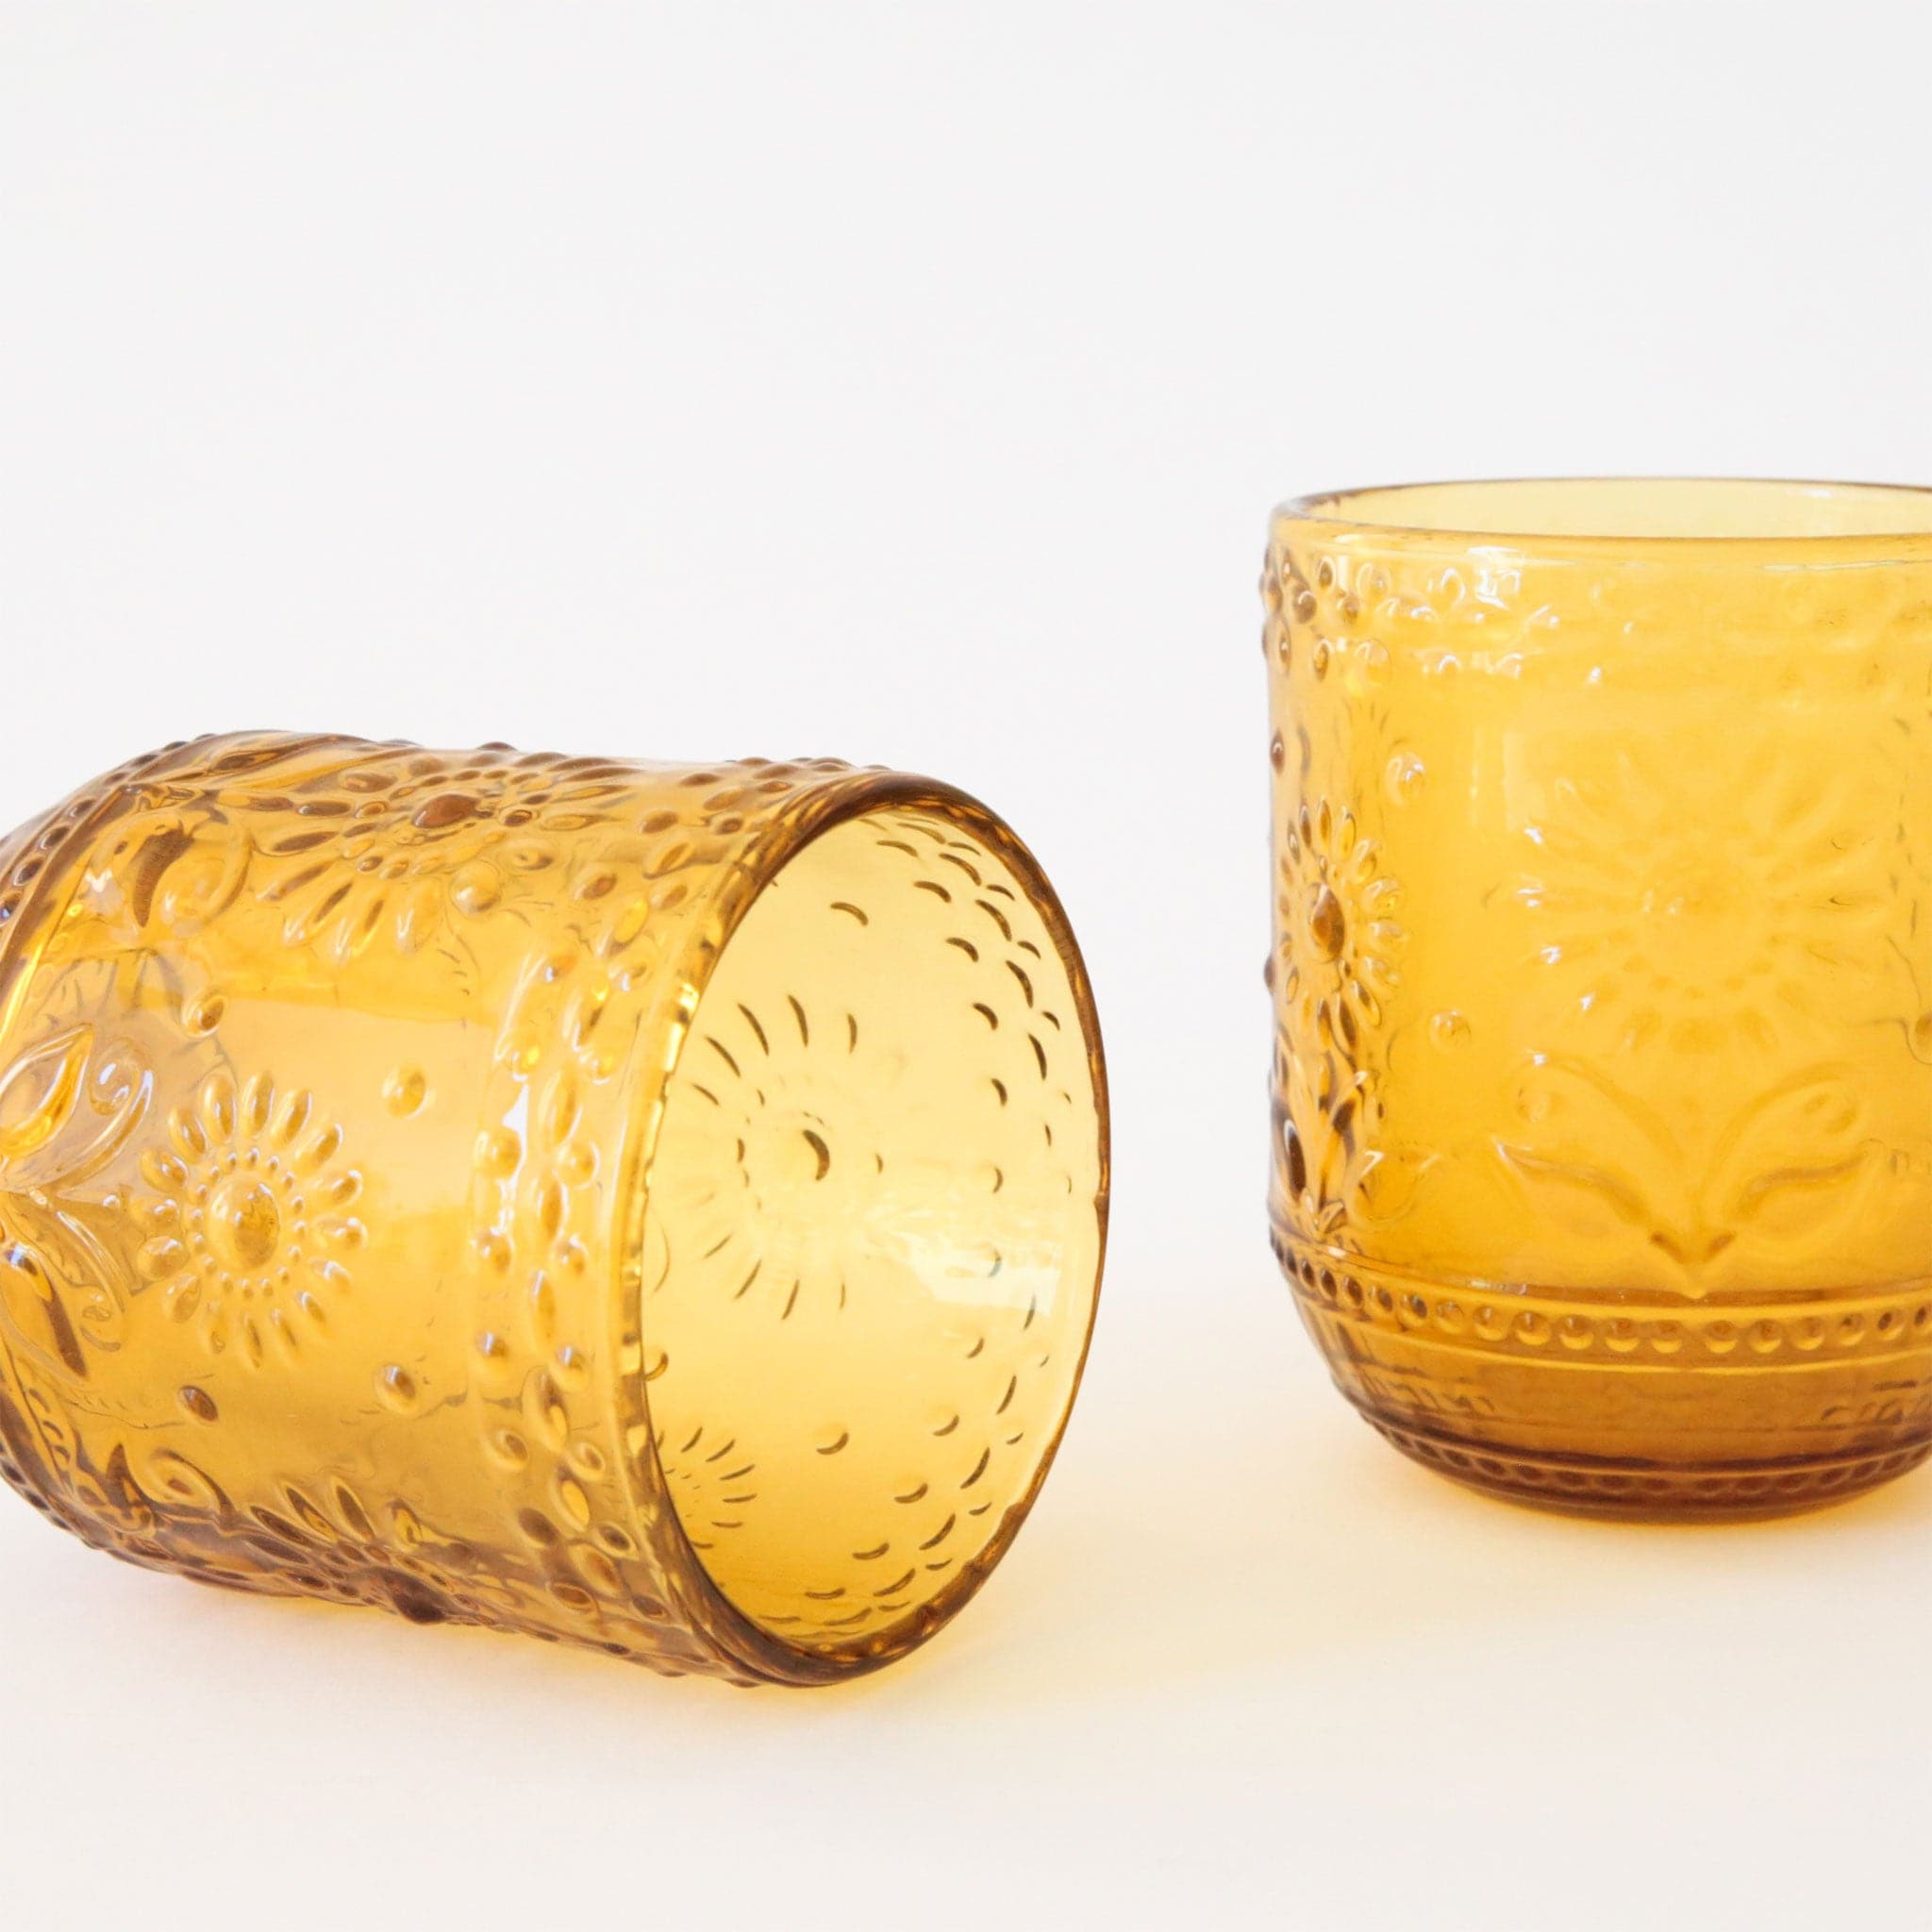 Two vintage inspired, embossed yellow drinking glasses with raised floral detailing. The glass to the left lays on its side and the glass to the right sits upright. 